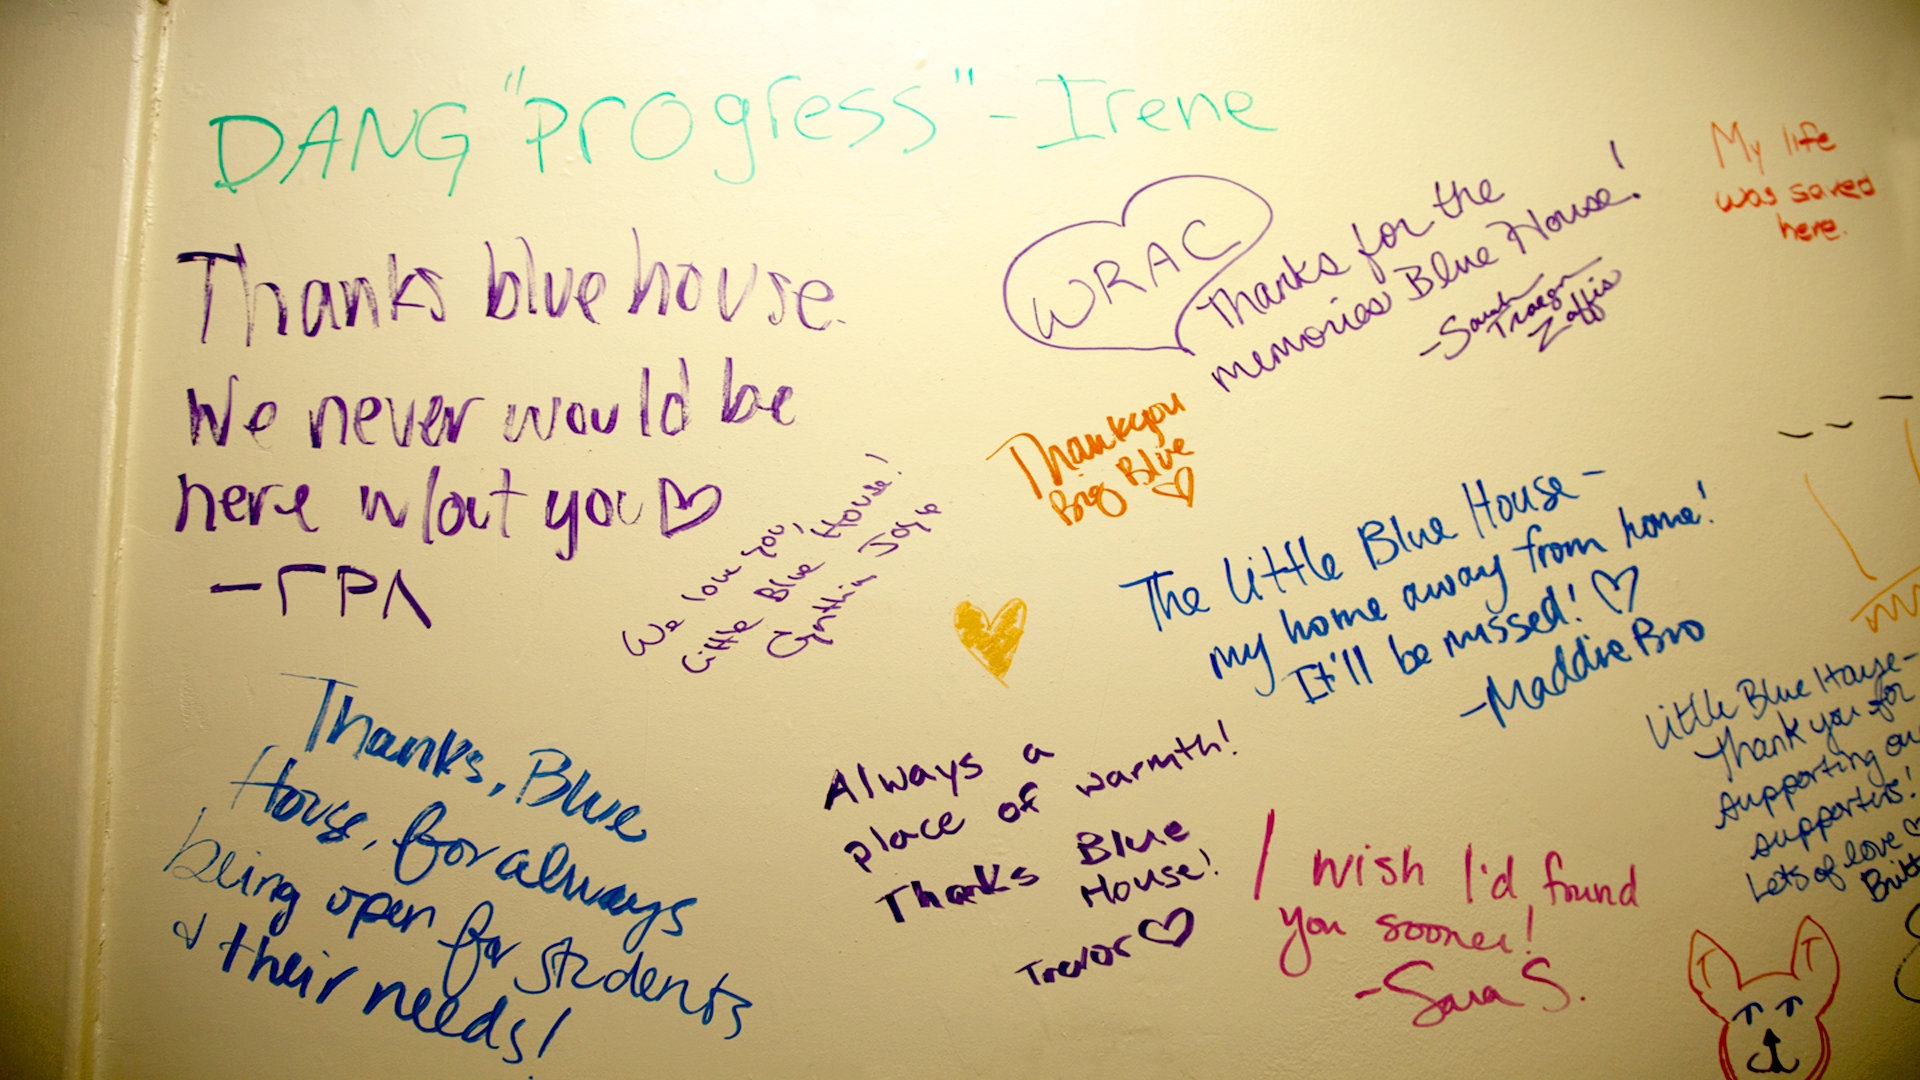 Messages about the BLue House